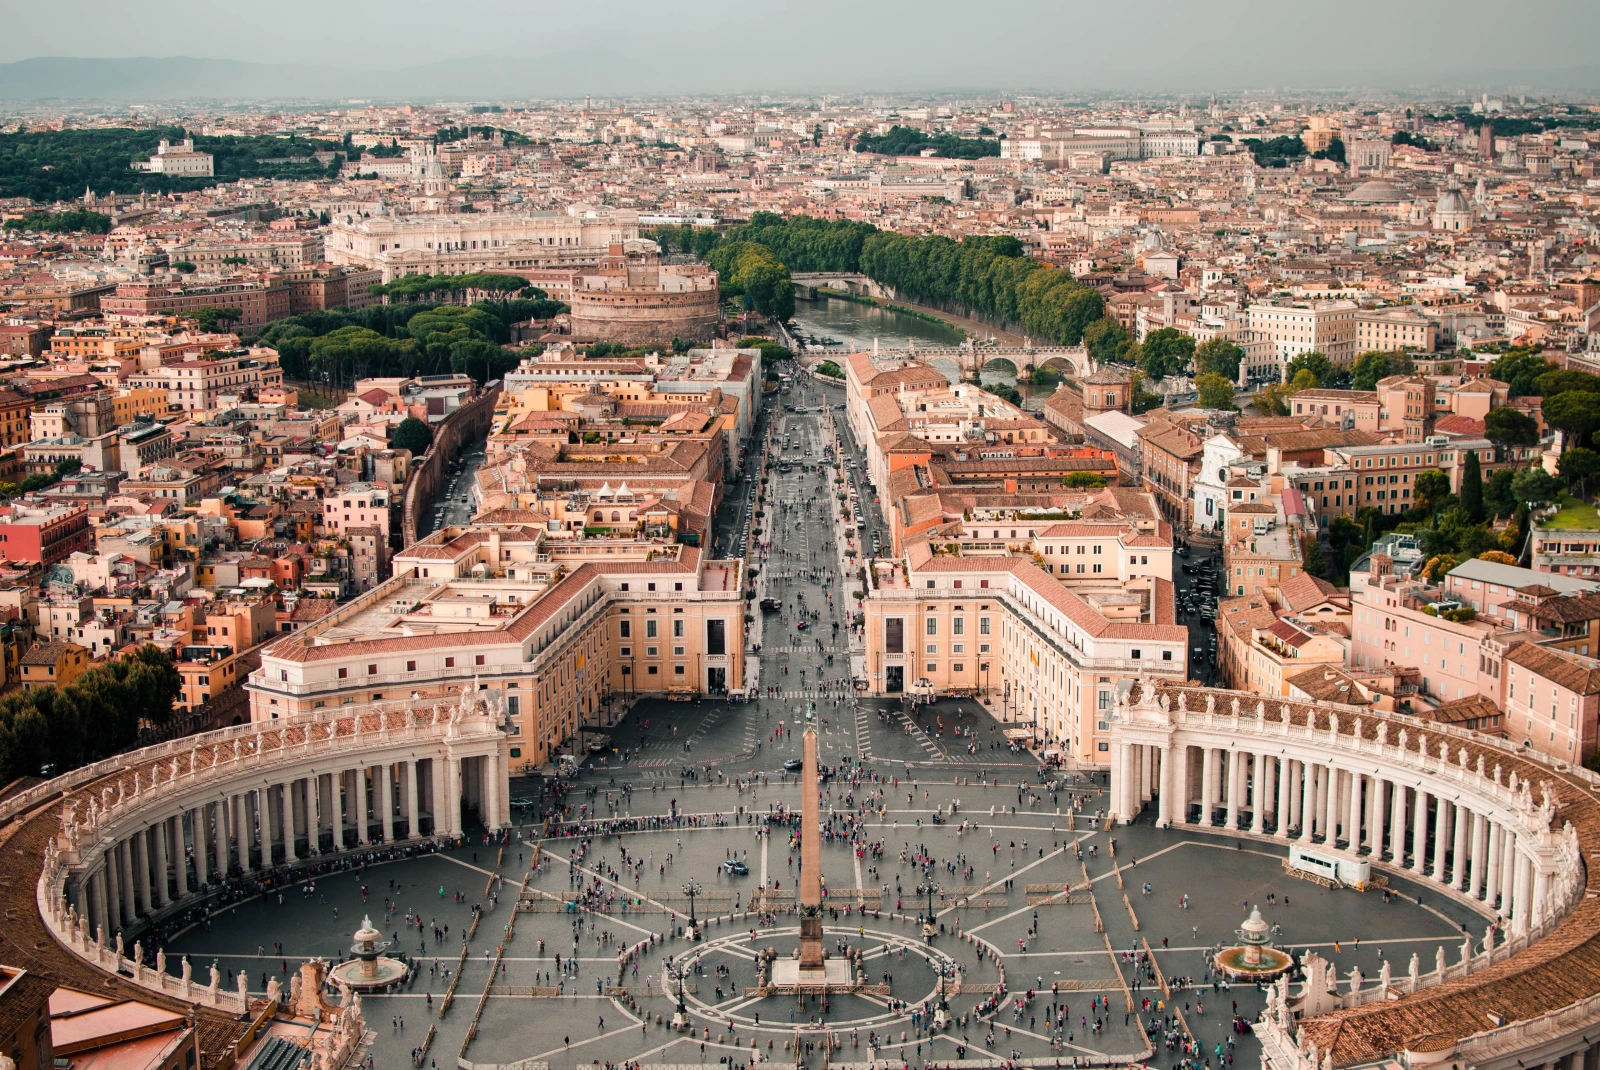 Taken from the top of the Vatican, on a vacation in Rome.